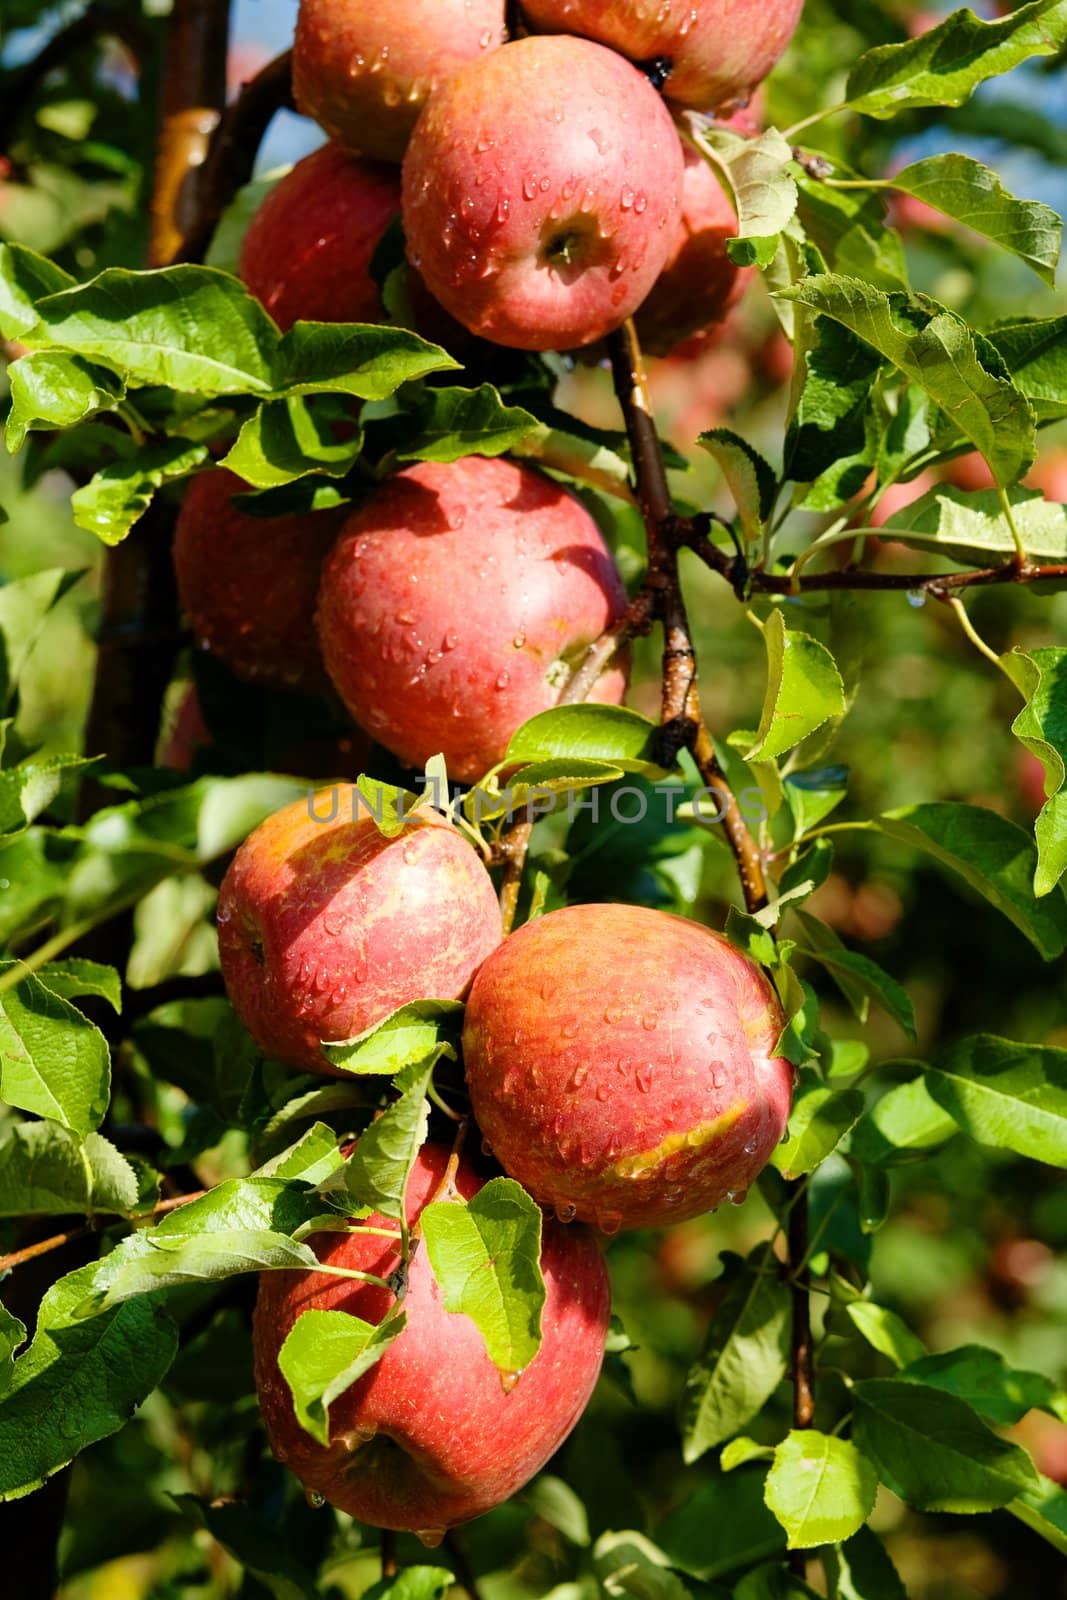 An image of a group of red apples on the tree